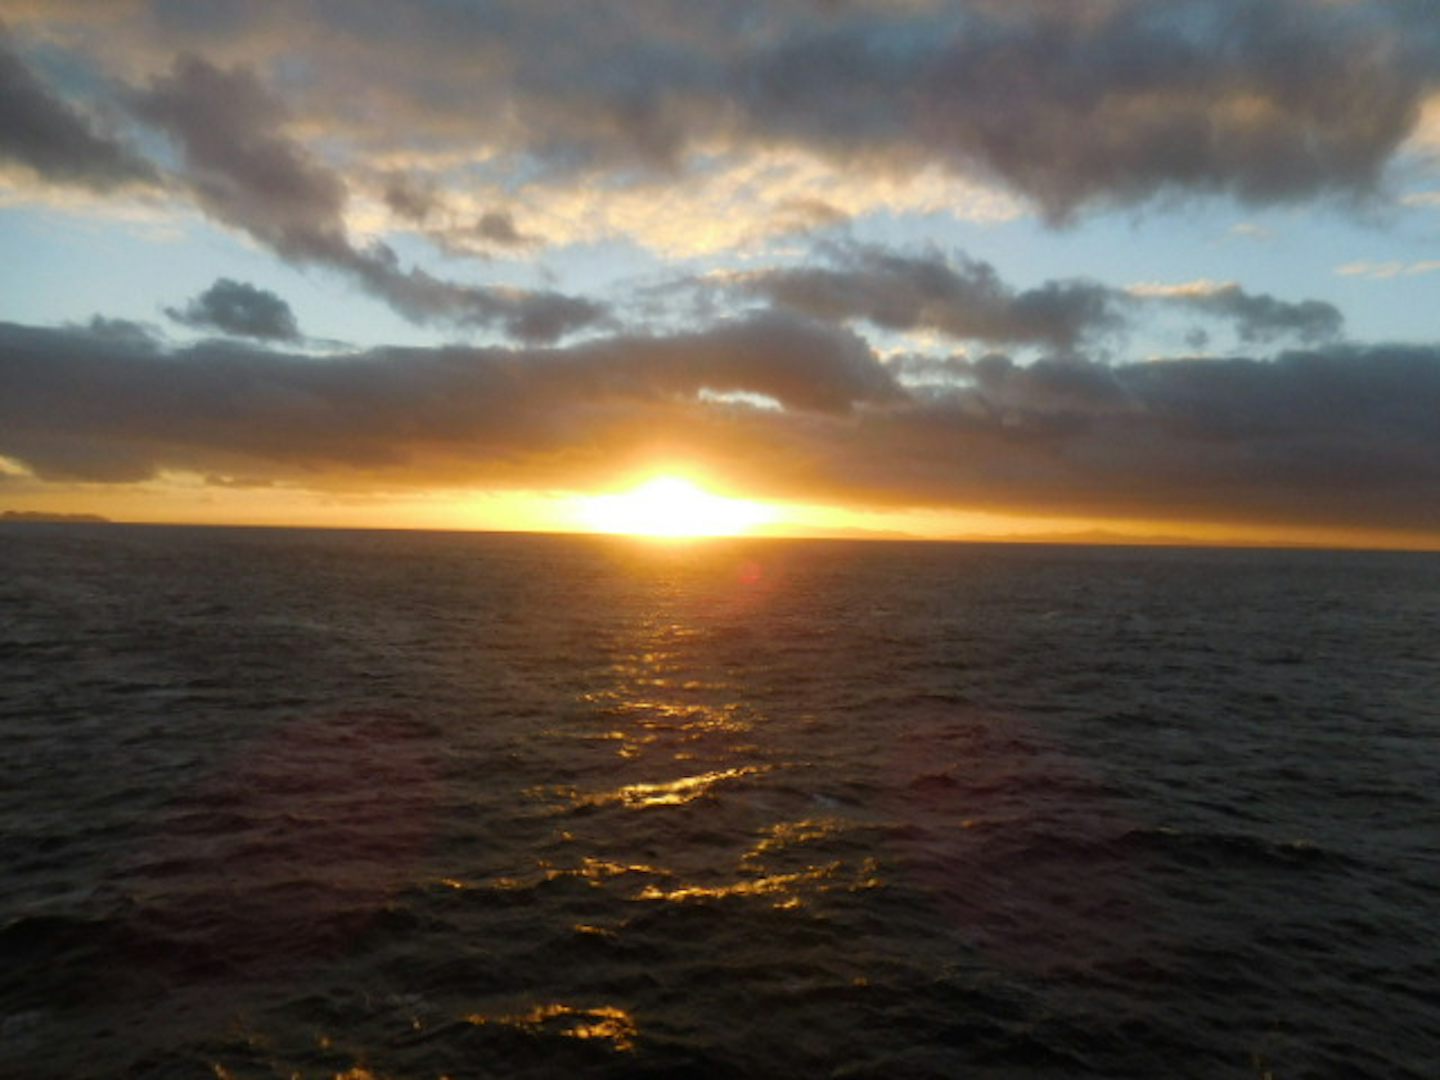 Photo taken from our cabin at sunrise on the trip to Auckland